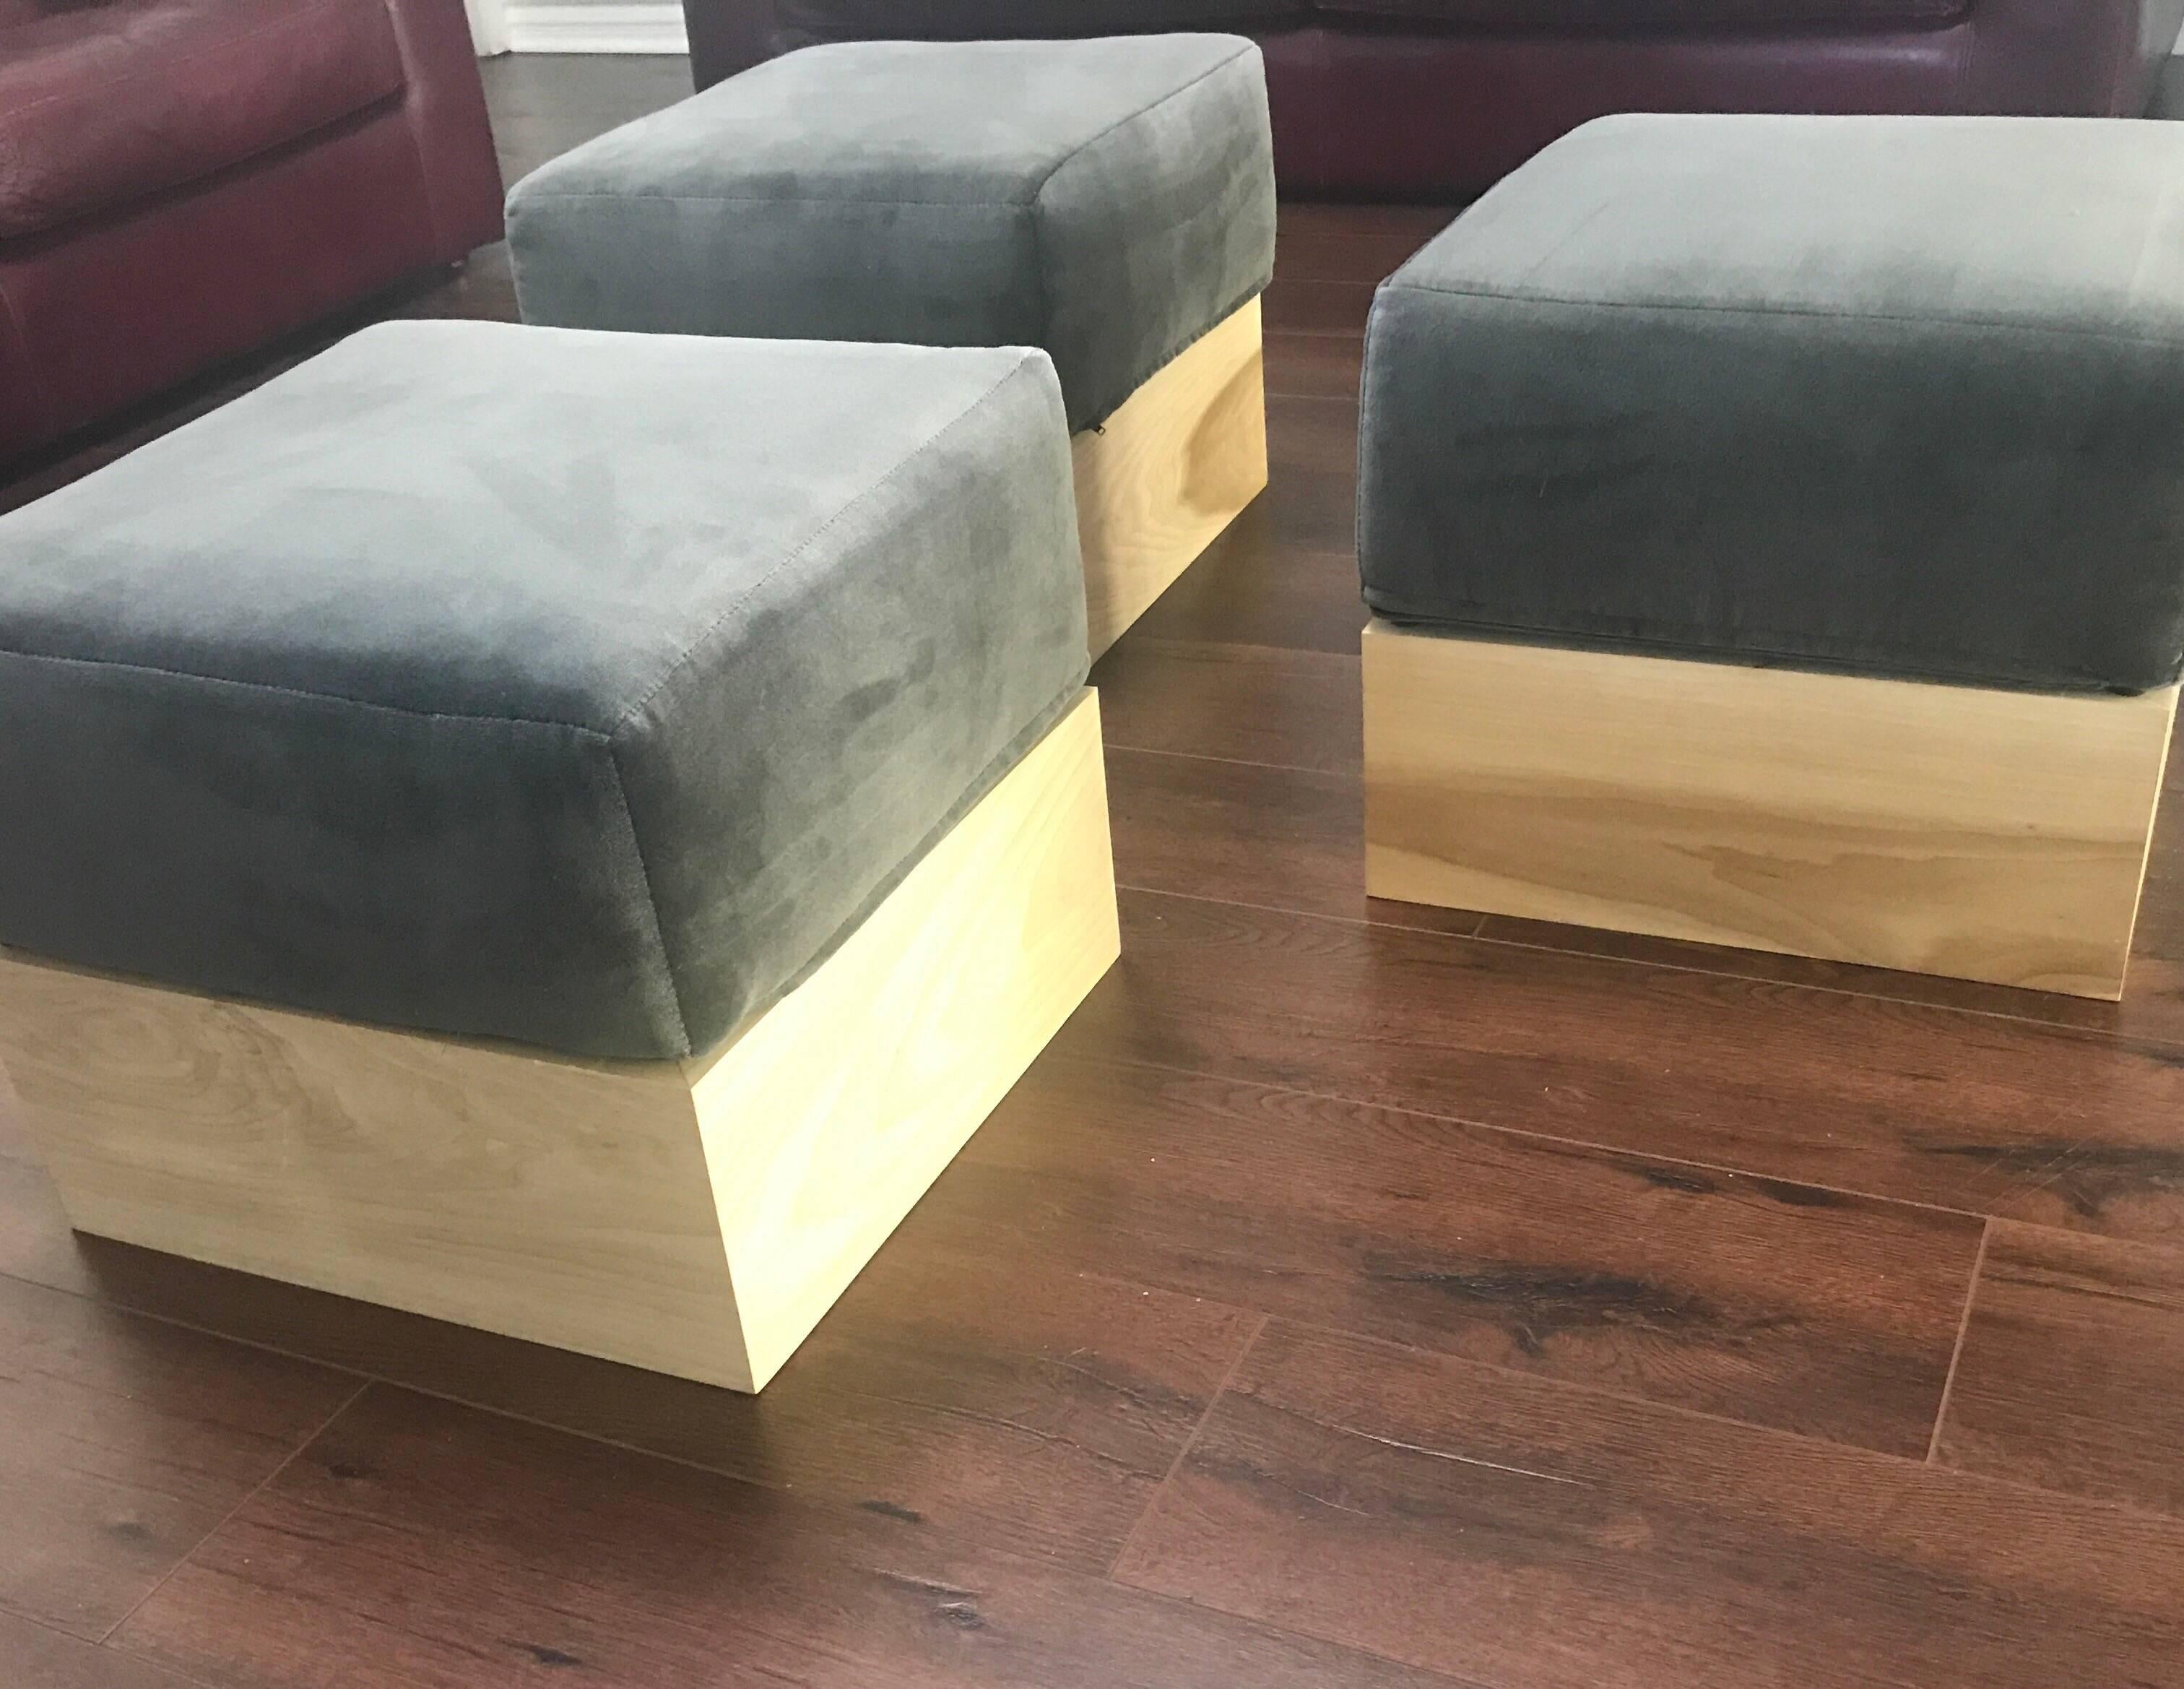 An early set of Modernist utilitarian solid square birch ottomans with plush smoked gray cotton upholstery made by the Haas Brothers for A Hollywood production company The ottomans were part of one of their first commissions for an entertainment